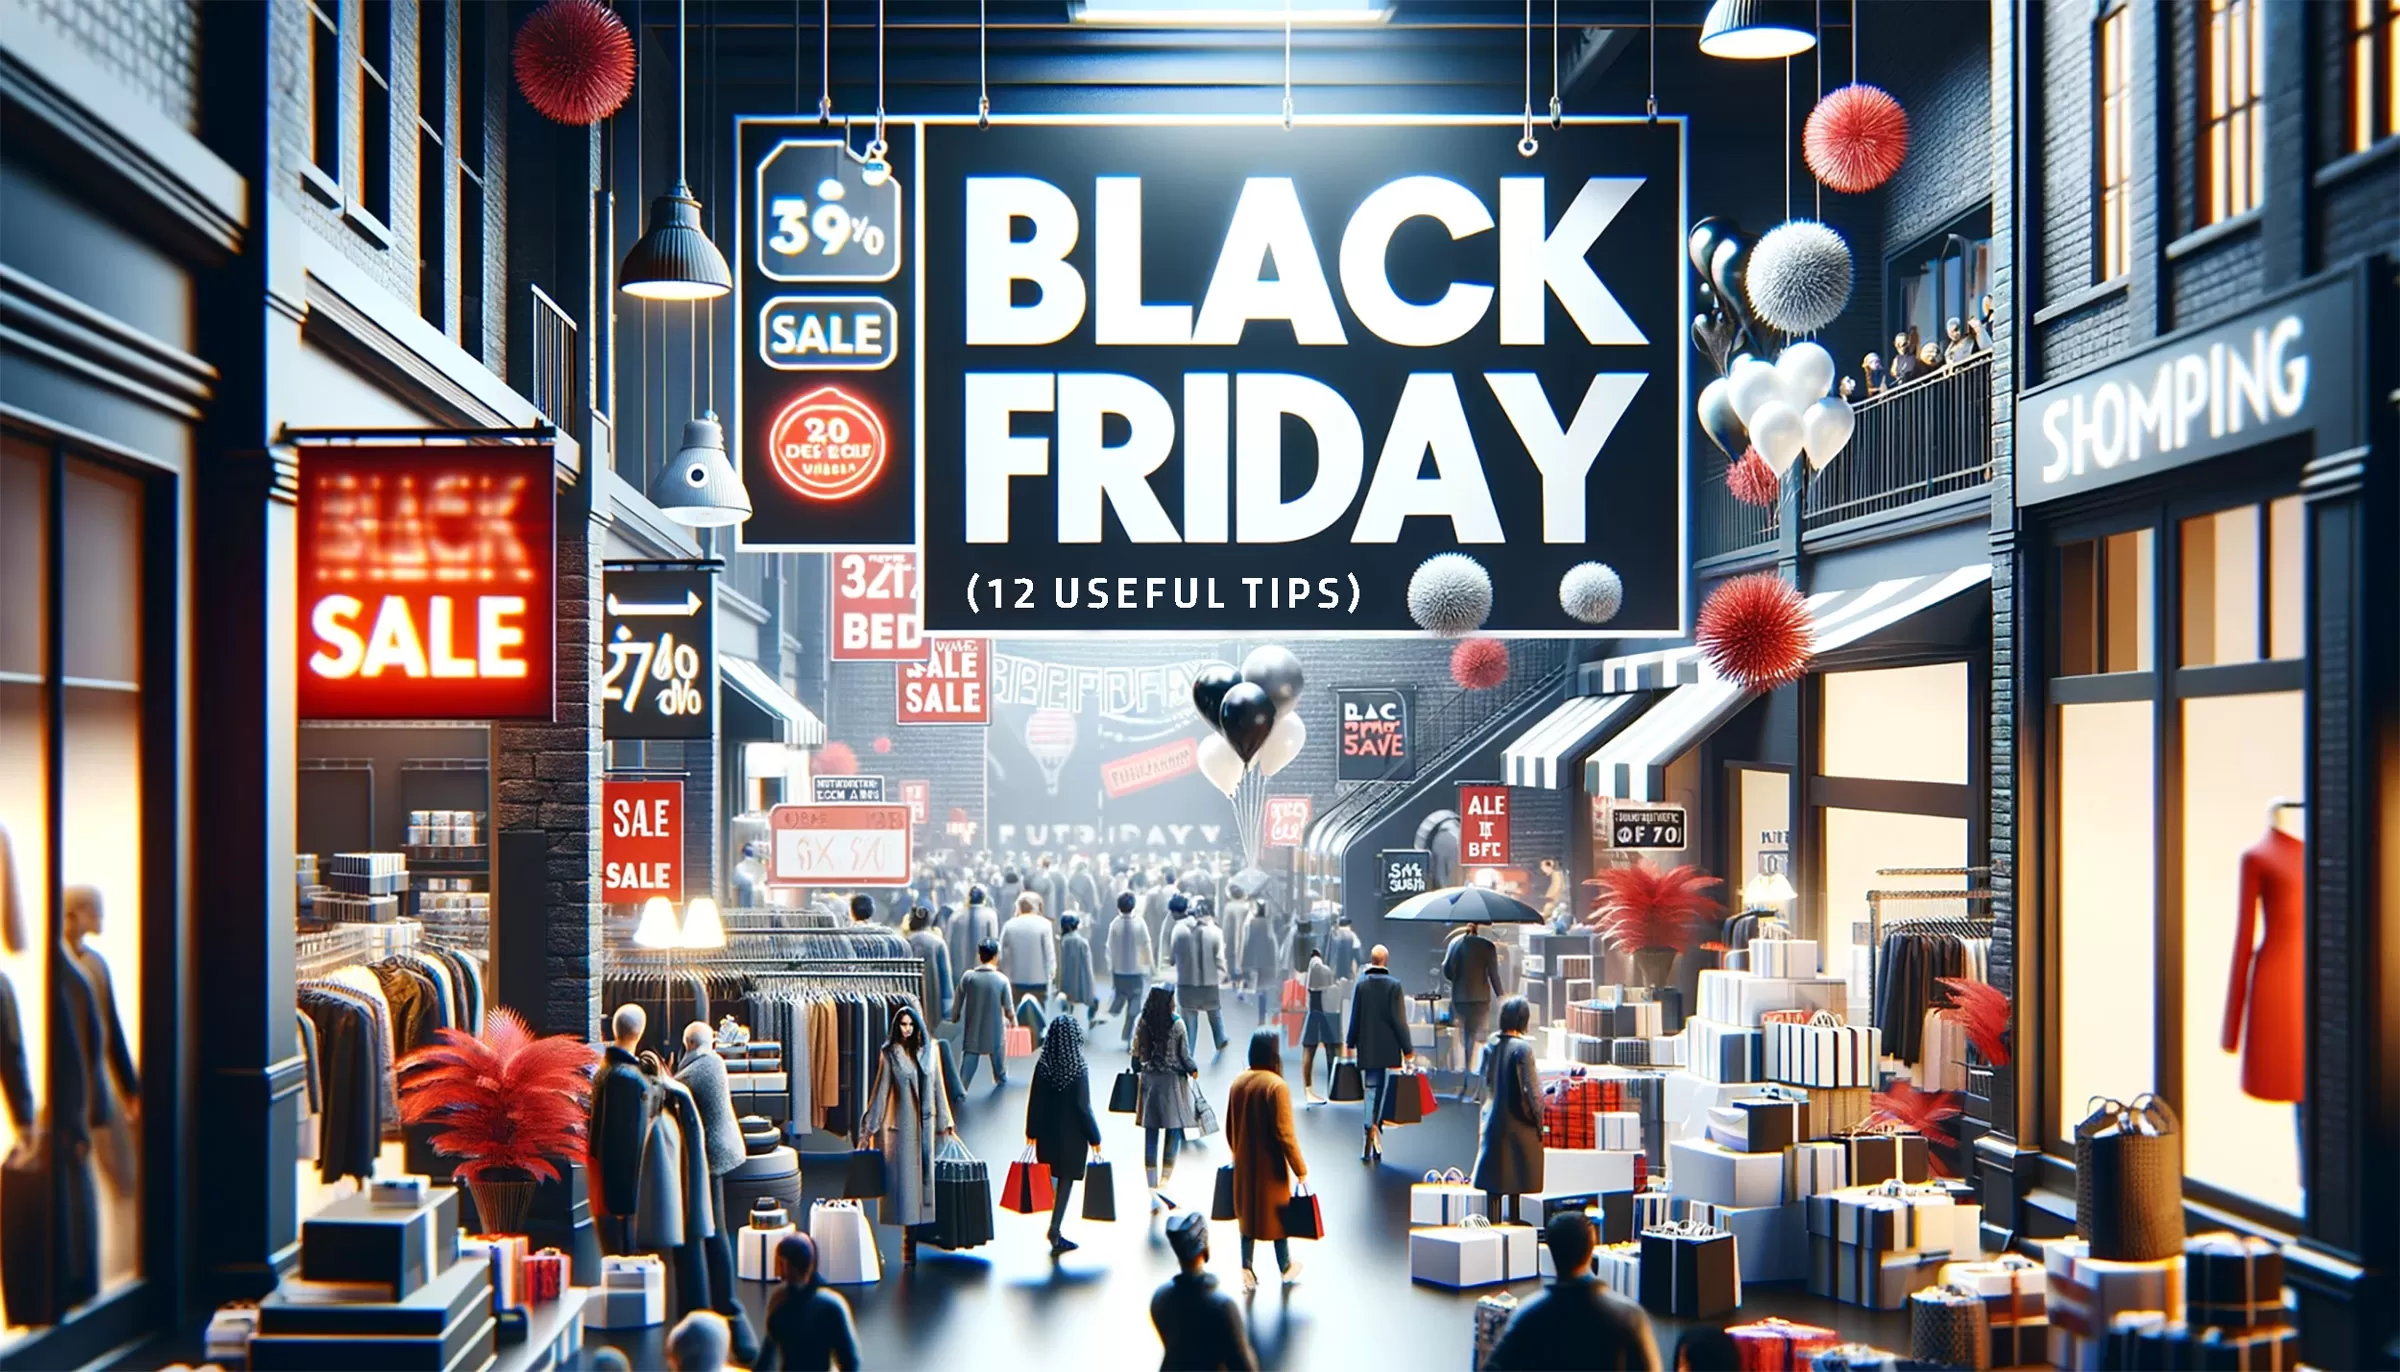 How to Sell More on Black Friday (12 Useful Tips)